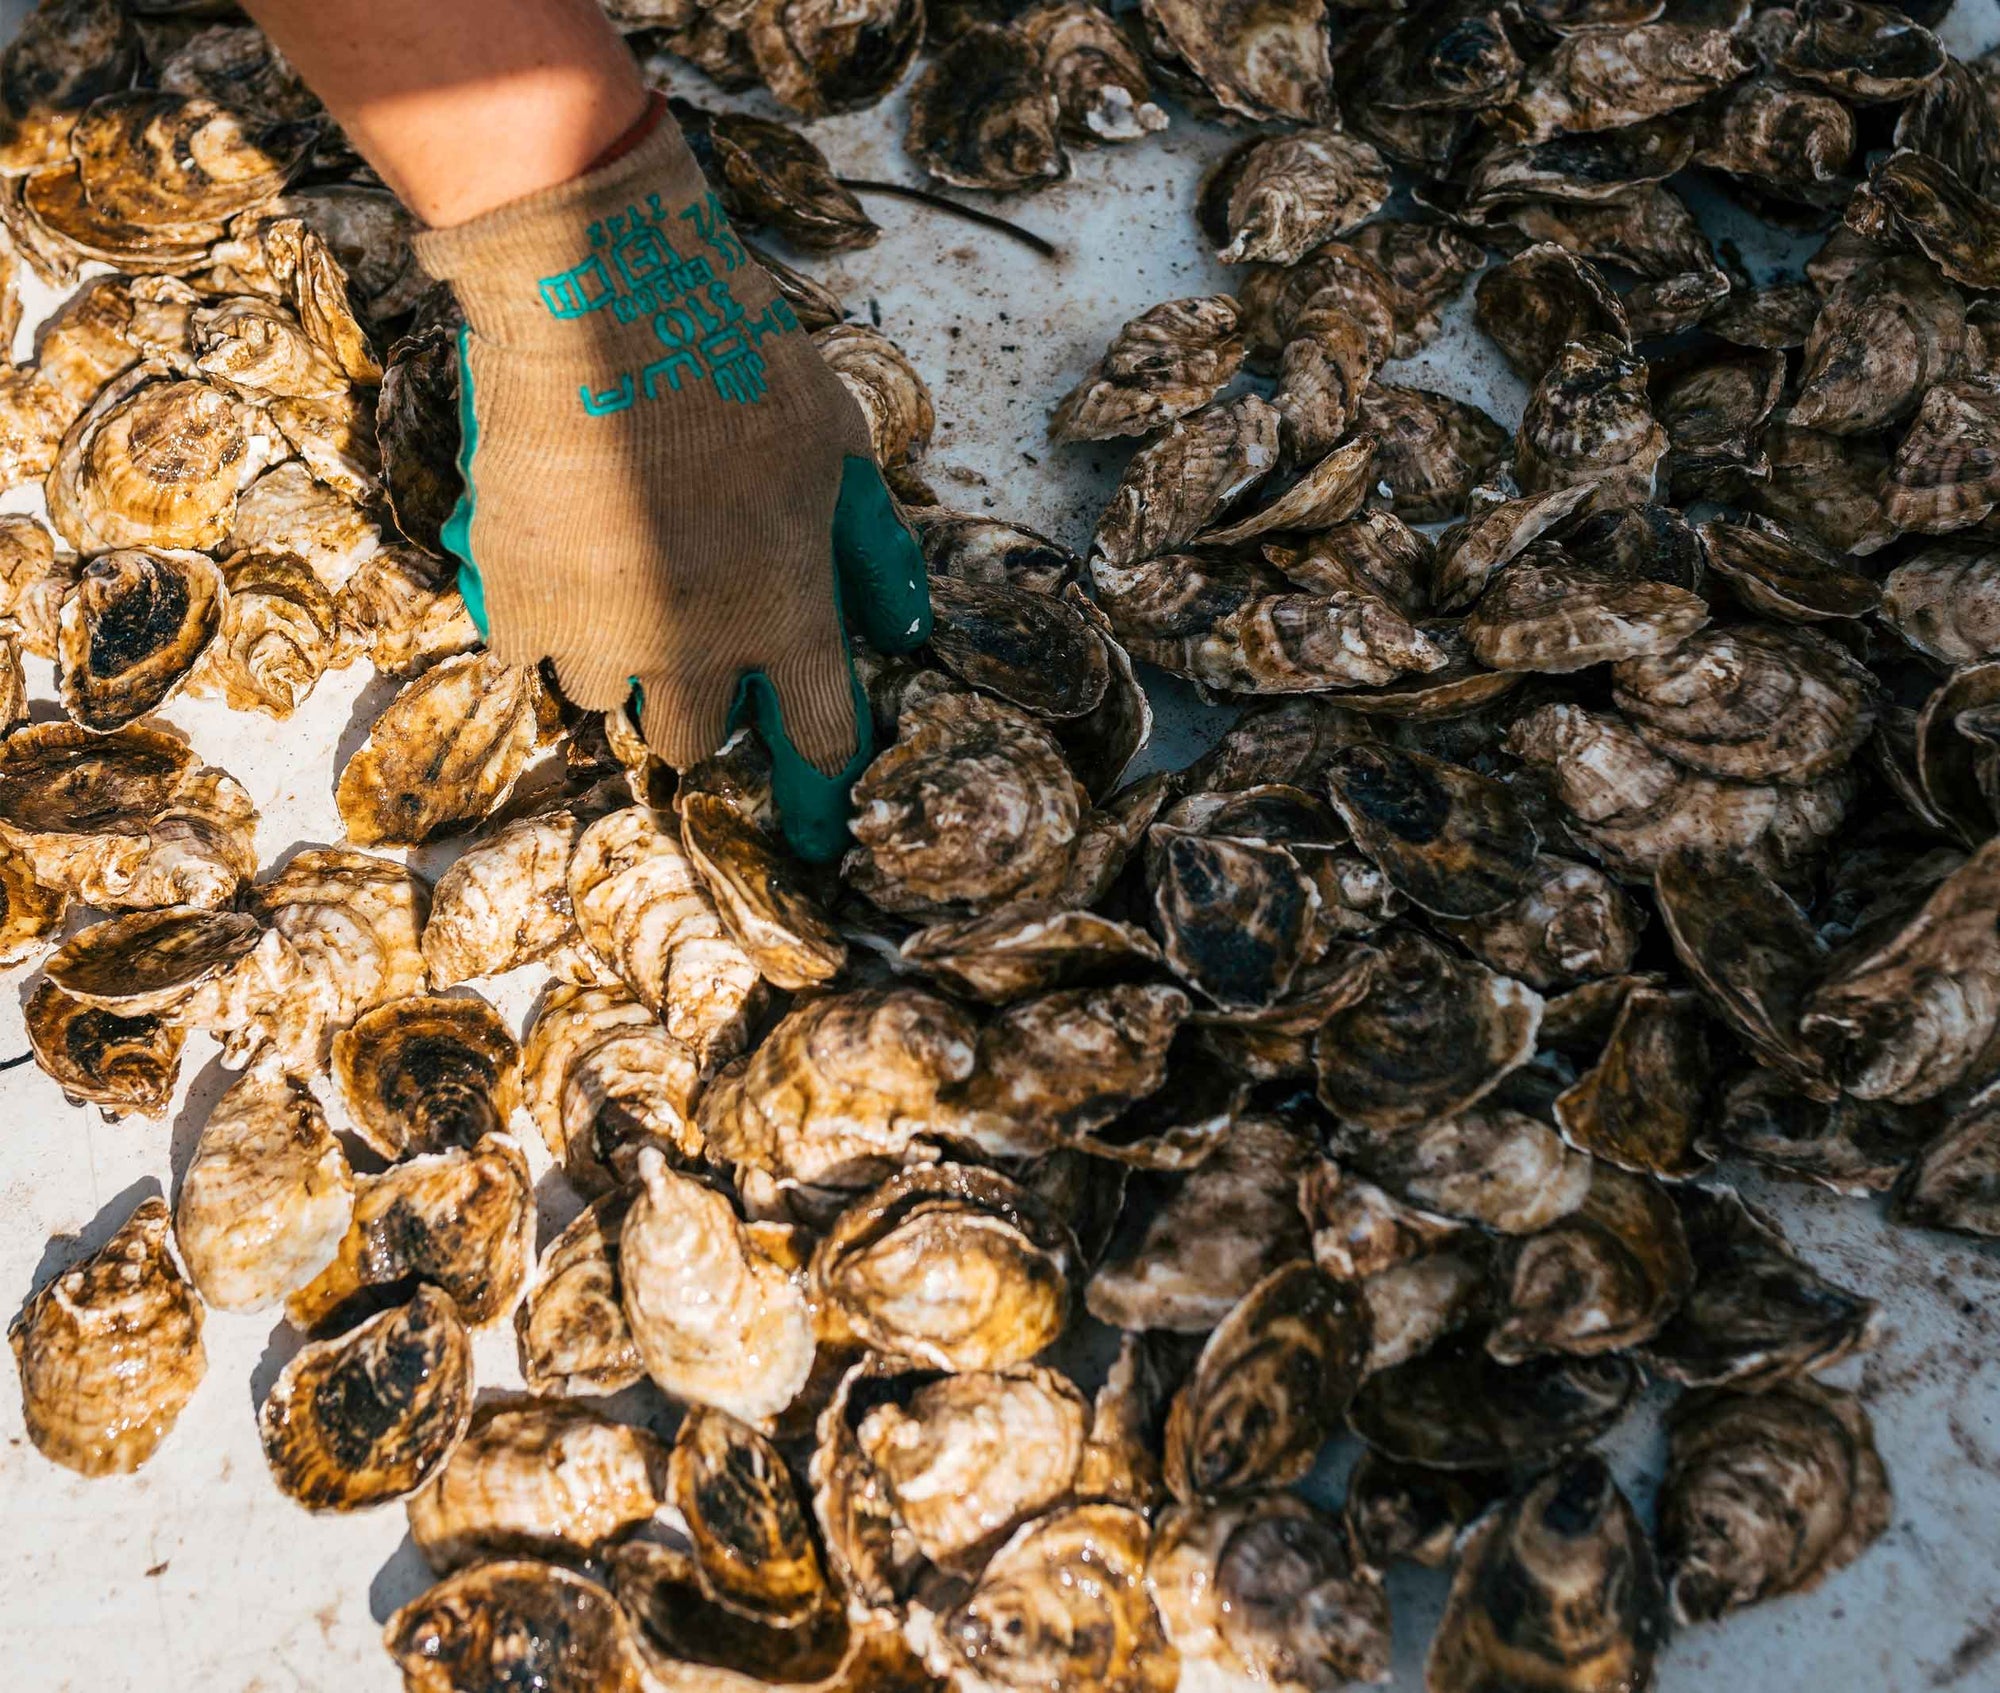 East Cape Oysters from Prince Edward Island, CAN